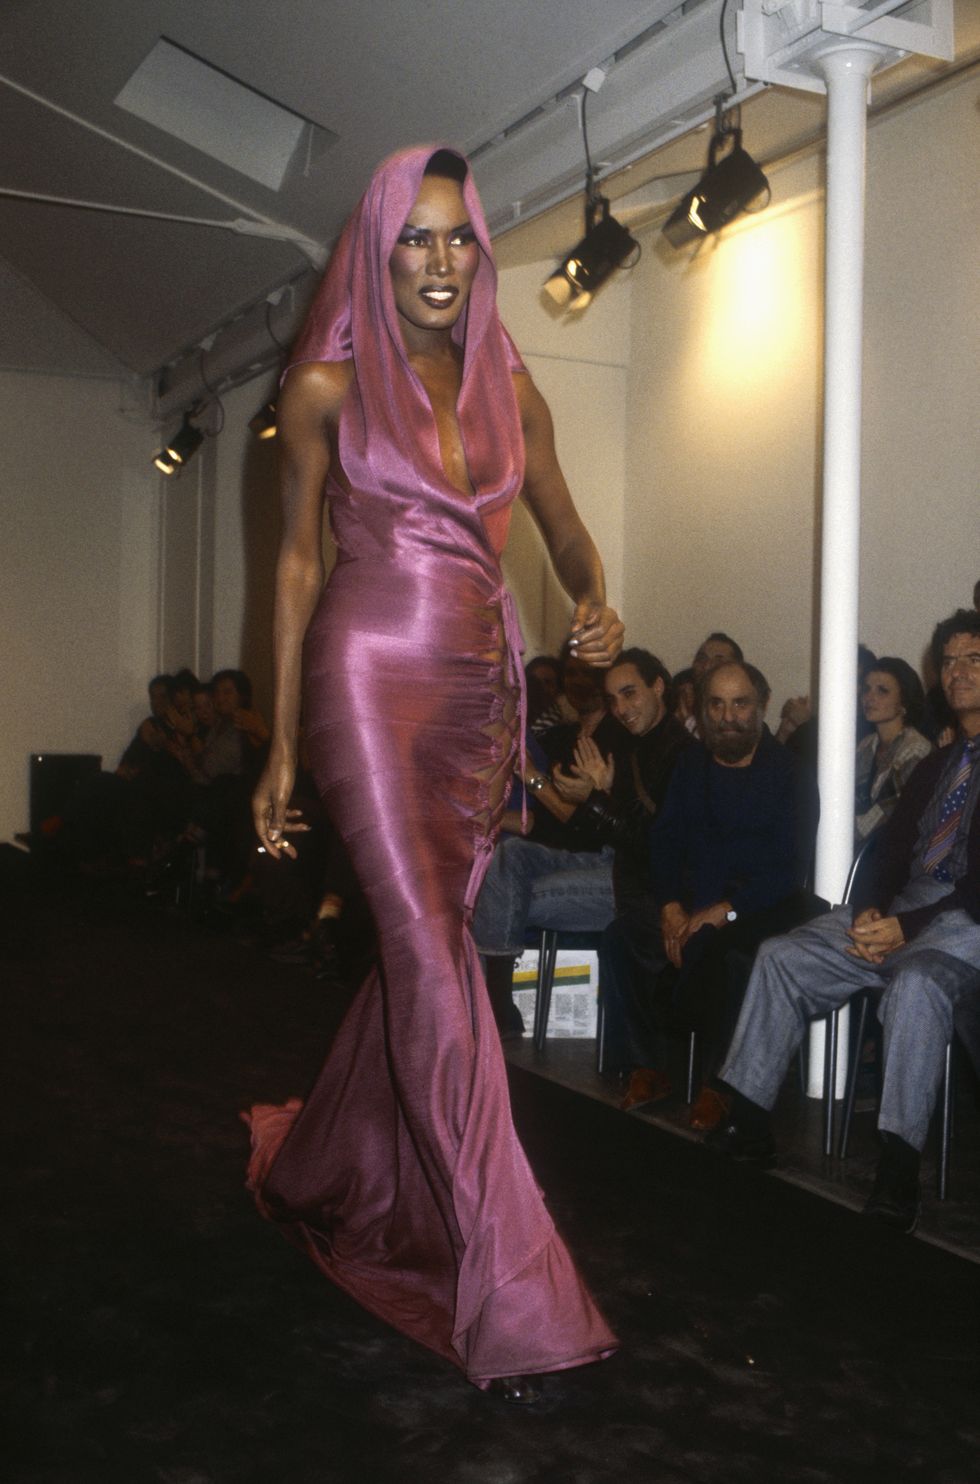 tunisian designer azzedline alaia shows his women's 1986 spring summer haute couture line in paris model grace jones, also known for her singing and acting career, is wearing a clingy pink dress with an attached hood photo by pierre vautheysygmasygma via getty images